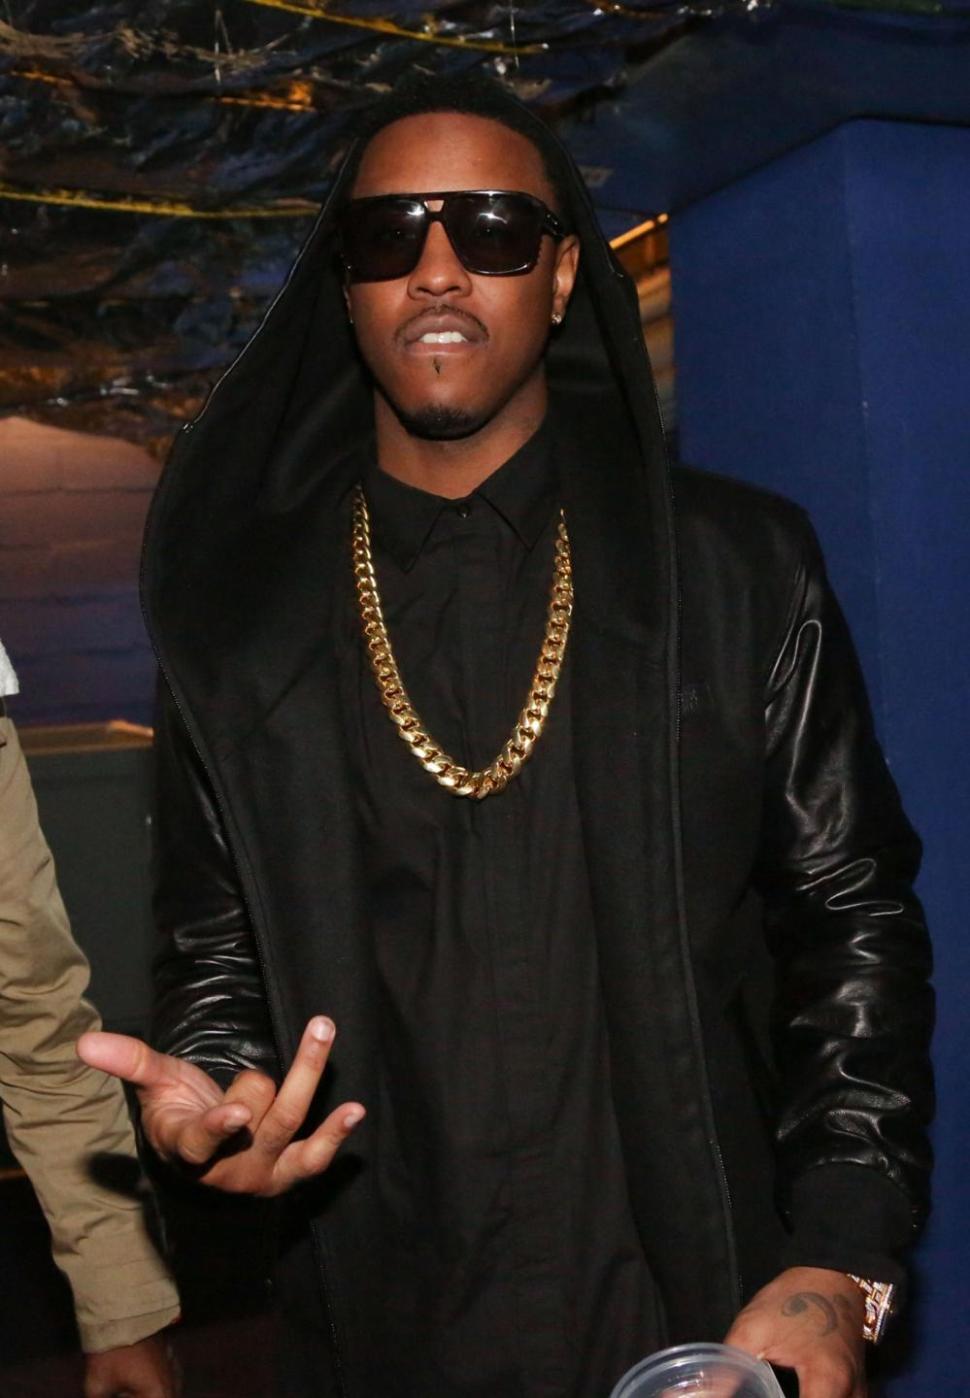 R&B singer Jeremih took an unplanned trip into police custody when his bouncer opened a door of a US Airways plane to let him and another musician on.